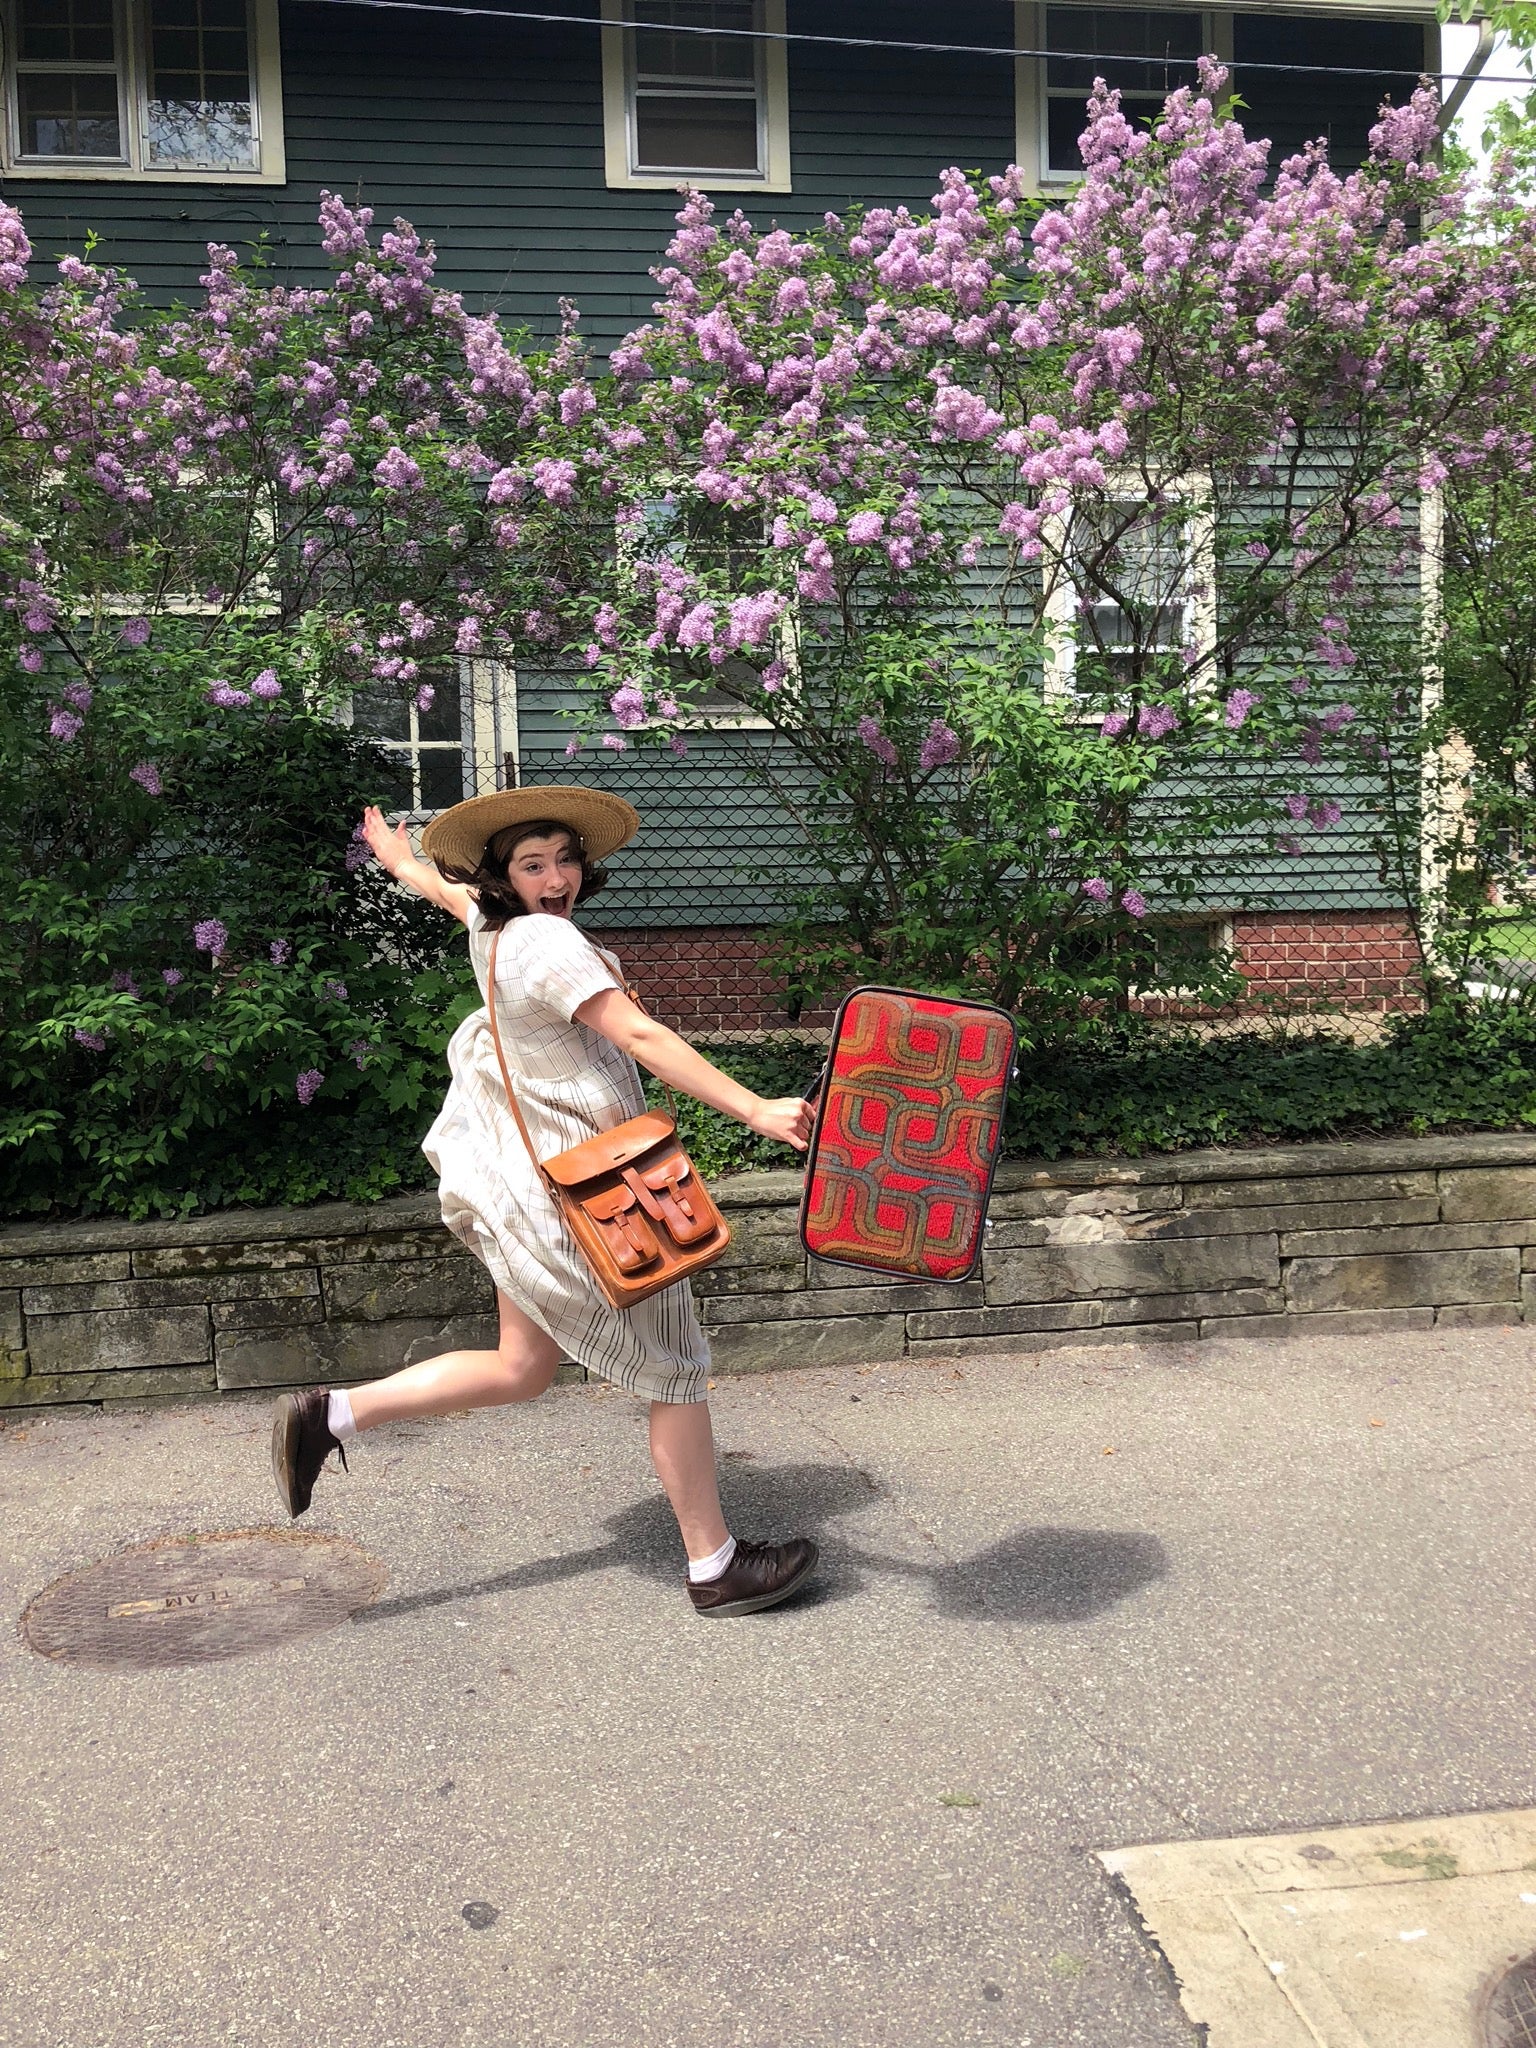 A girl wearing a hat and carrying a suitcase jumps in front of a bush with purple flowers 